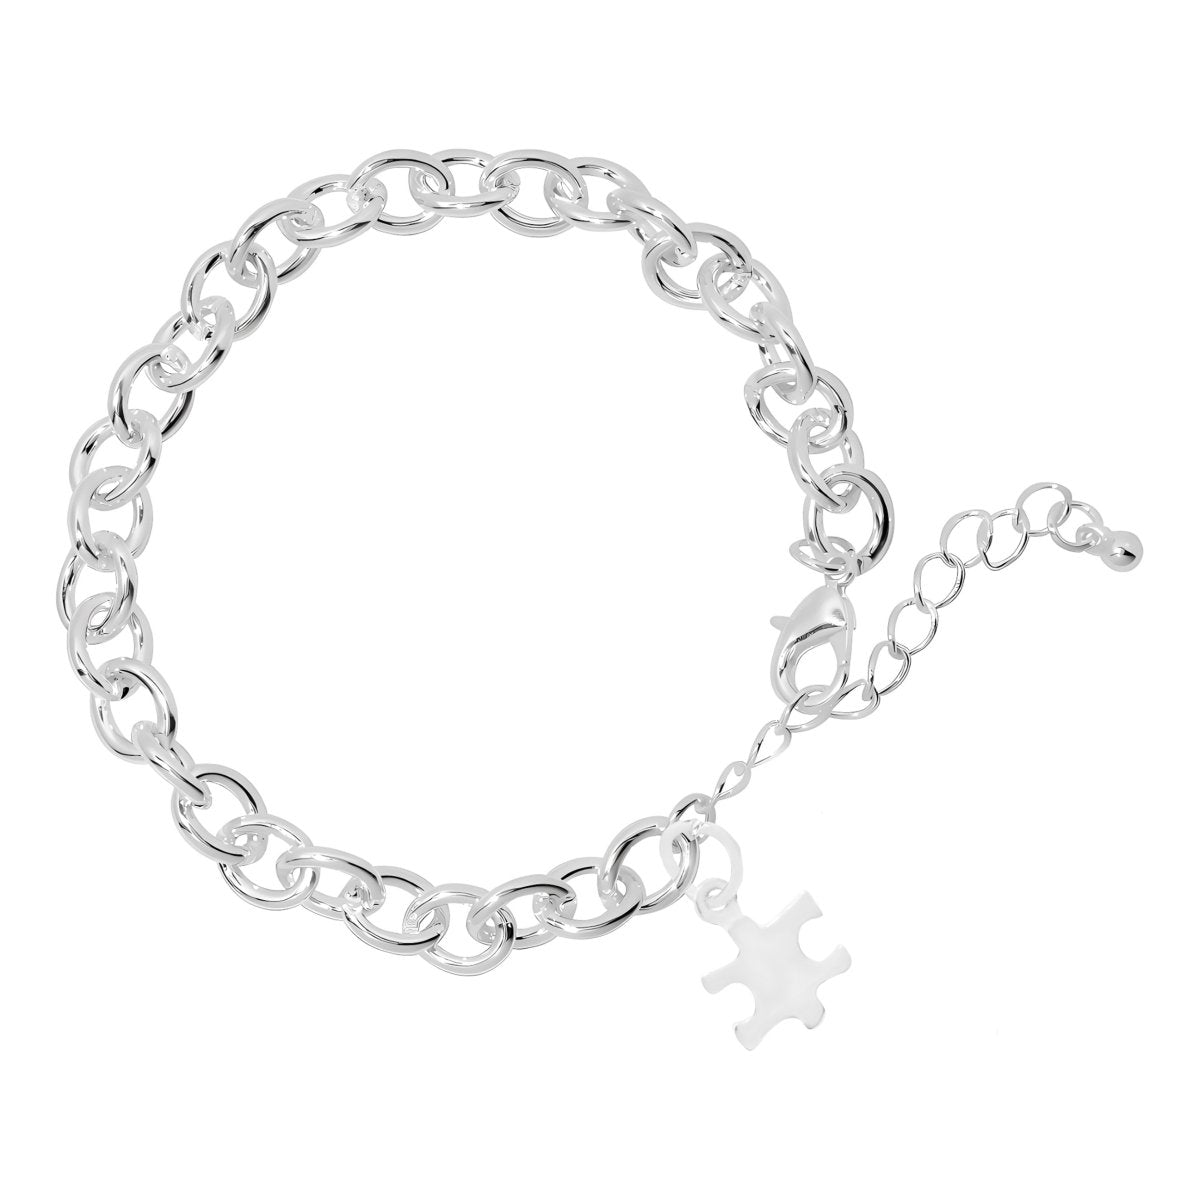 Small Autism Awareness Puzzle Piece Chunky Charm Bracelets - Fundraising For A Cause